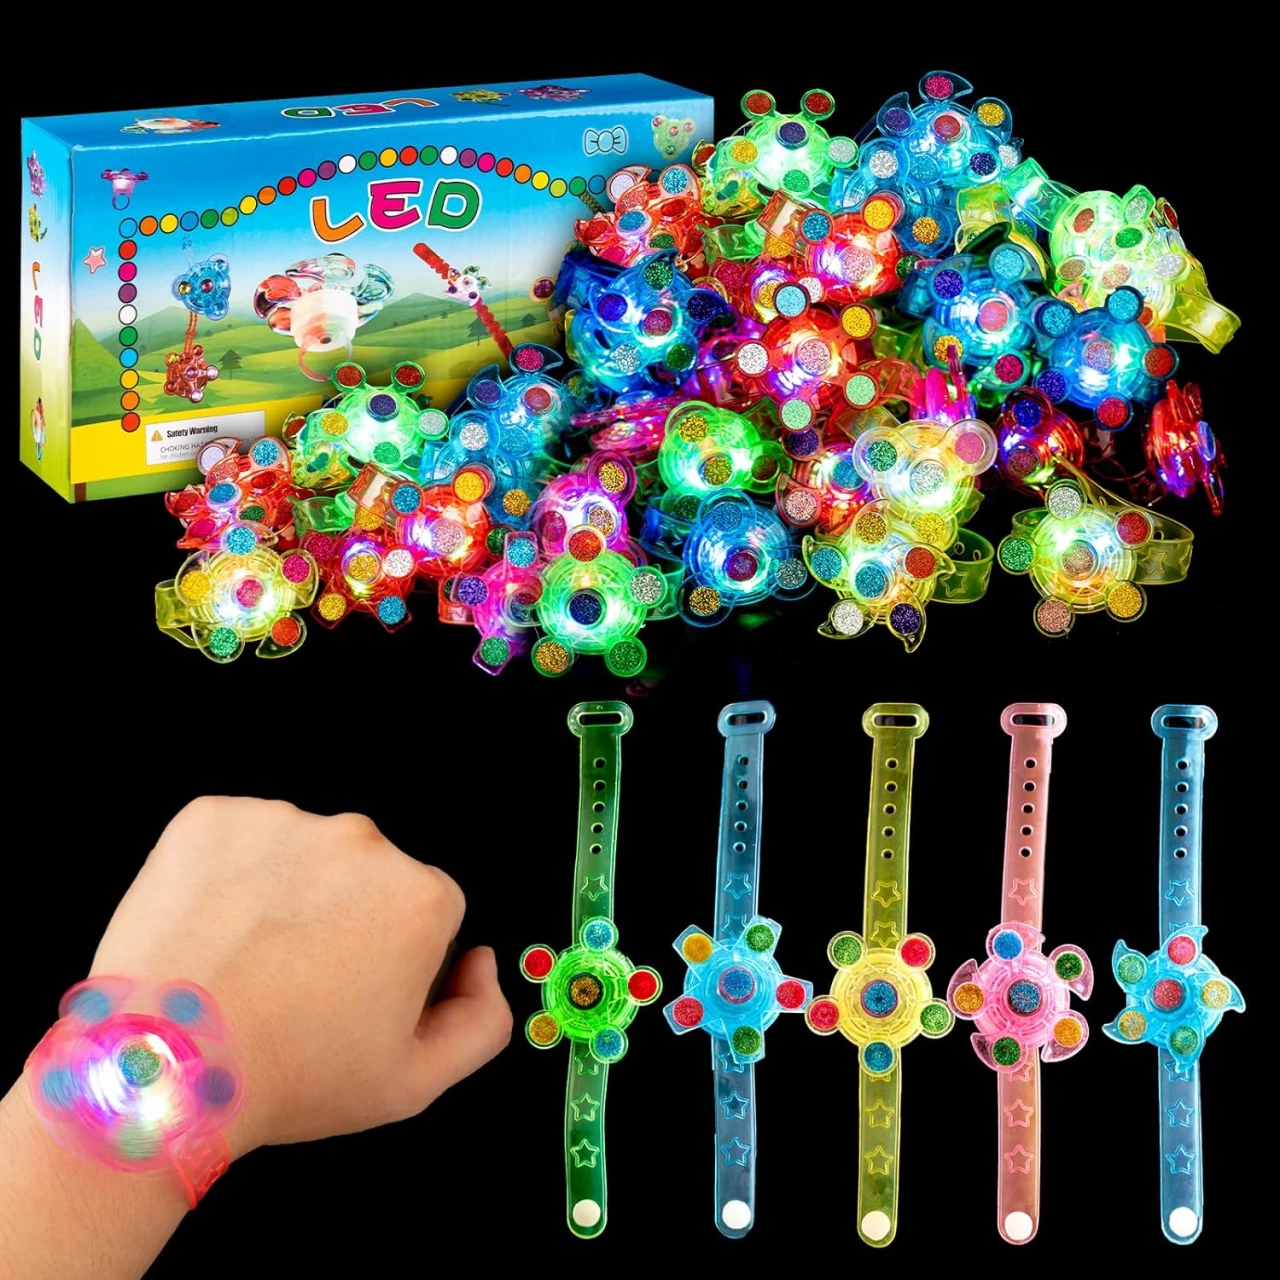 25 Pcs Goodie Bag Stuffers LED Light Up Fidget Spinner Bracelets,Party Favors for Kids 4-8 8-12 ,Glow in The Dark Party Supplies Return Gifts for Kids Birthday Christmas Stocking Halloween Easter